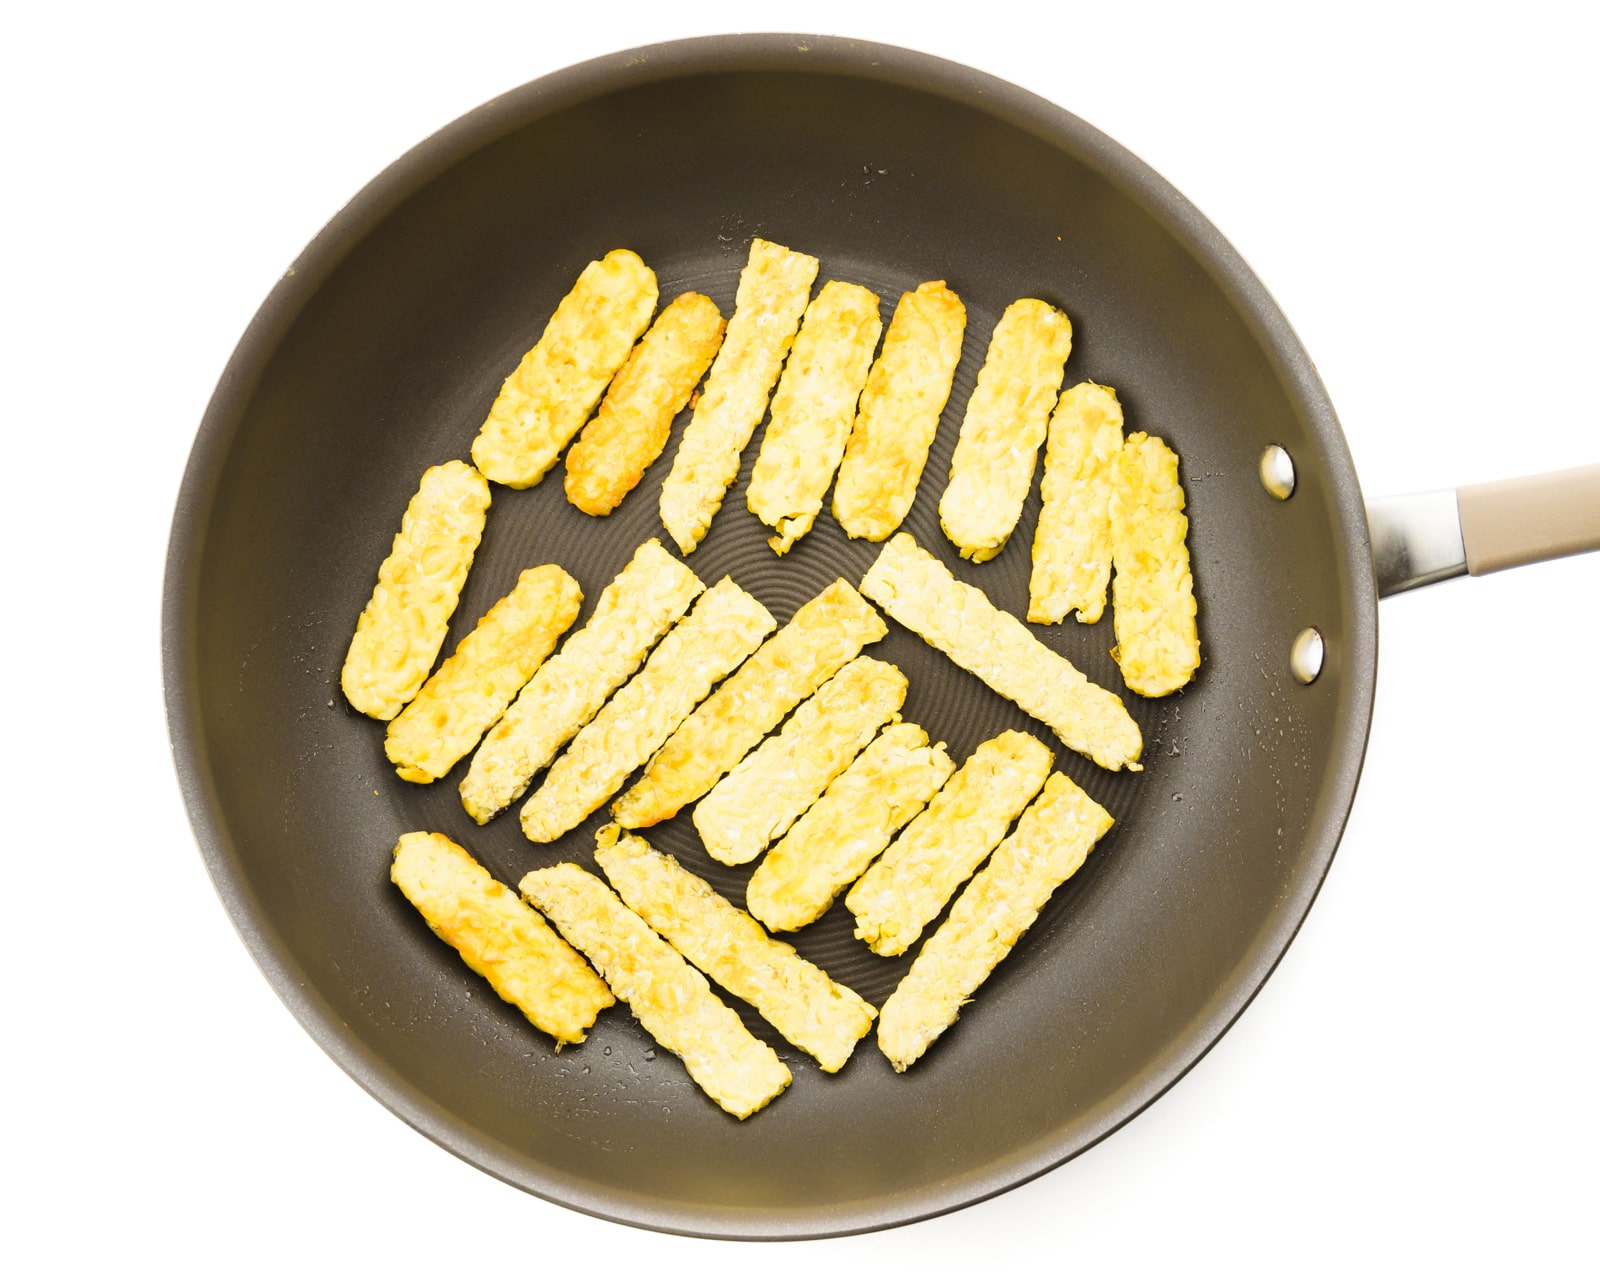 Strips of tempeh are in a skillet being cooked.